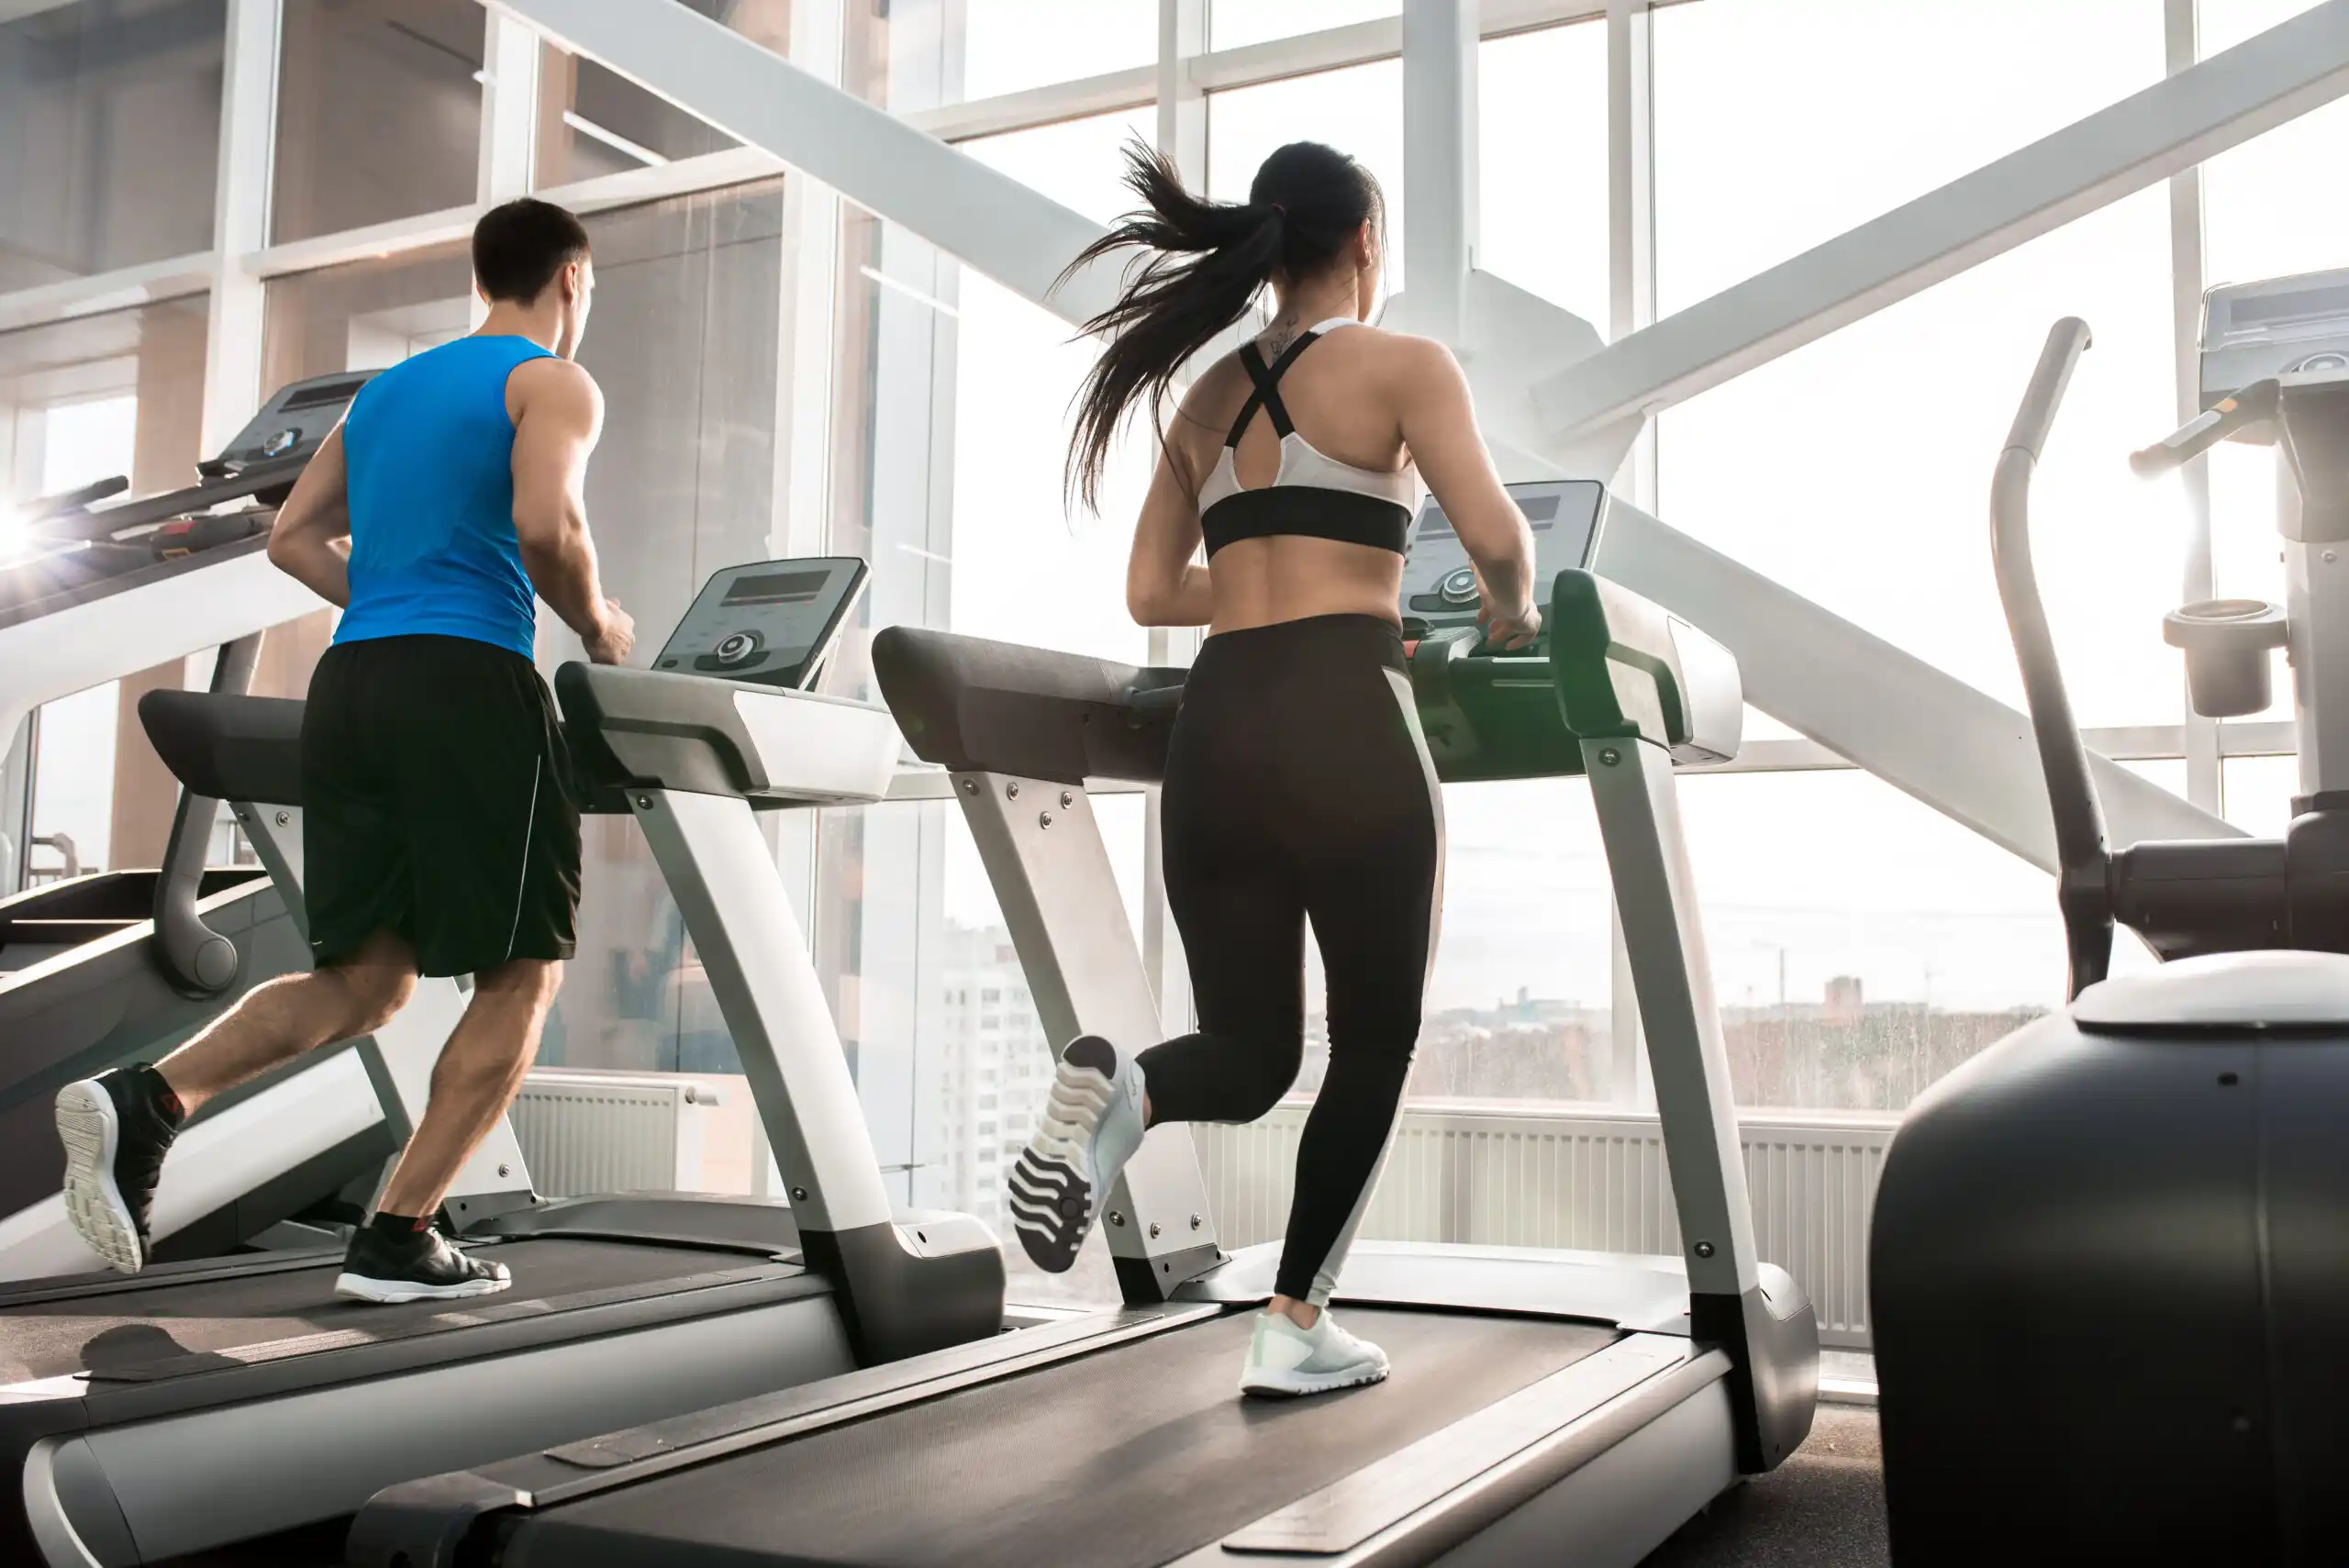 The Best Ways to Save Money on Gym Memberships